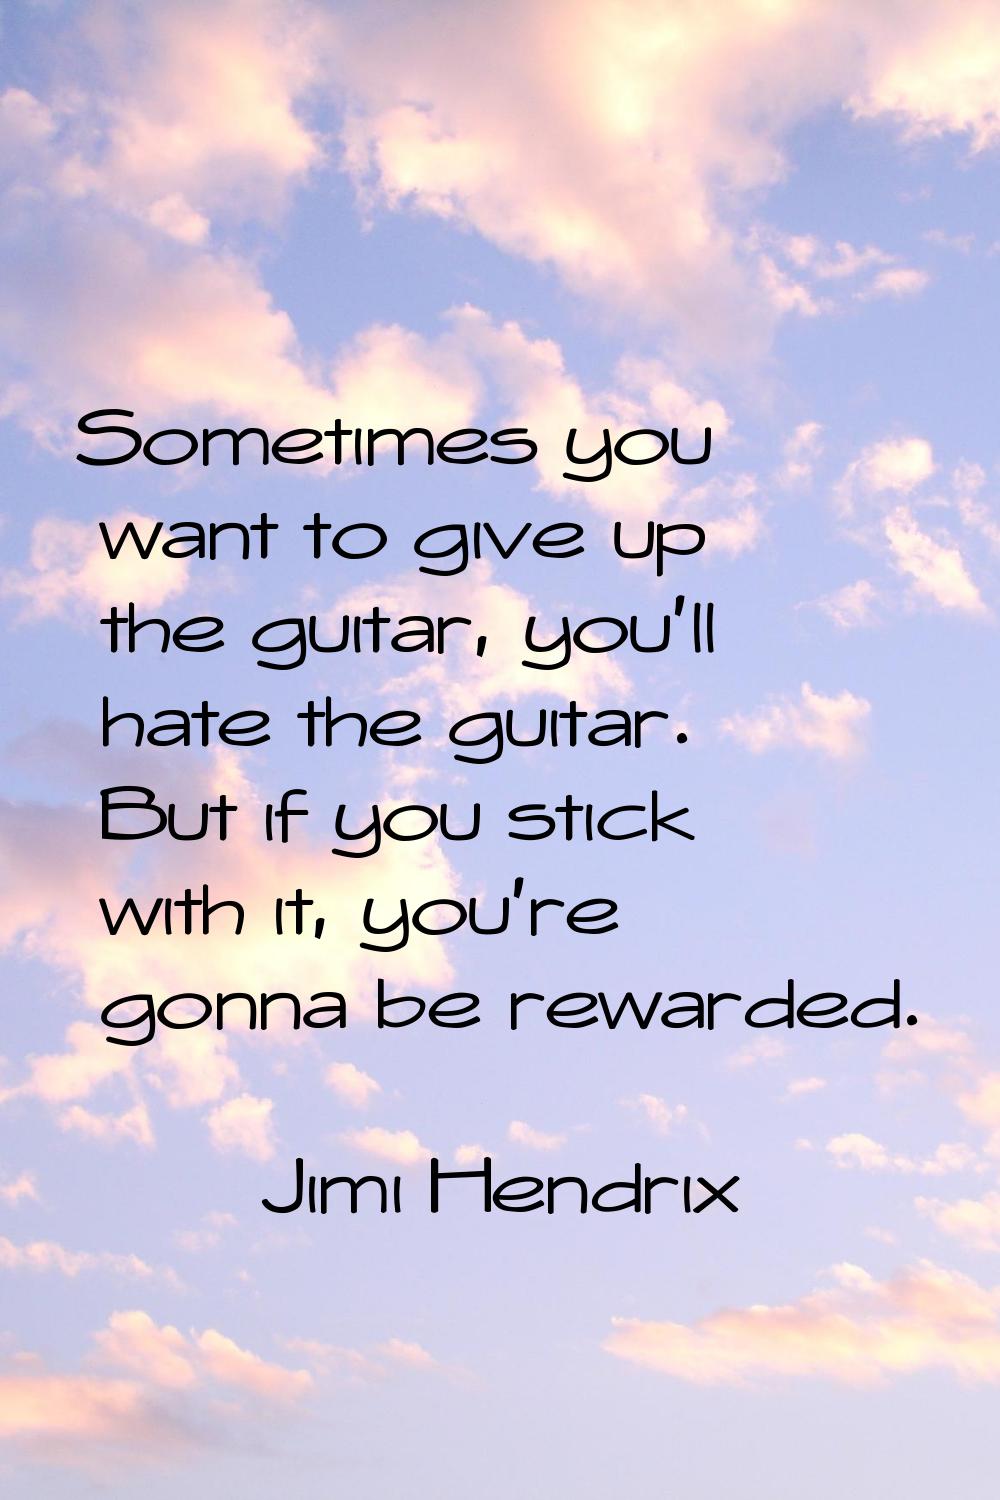 Sometimes you want to give up the guitar, you'll hate the guitar. But if you stick with it, you're 